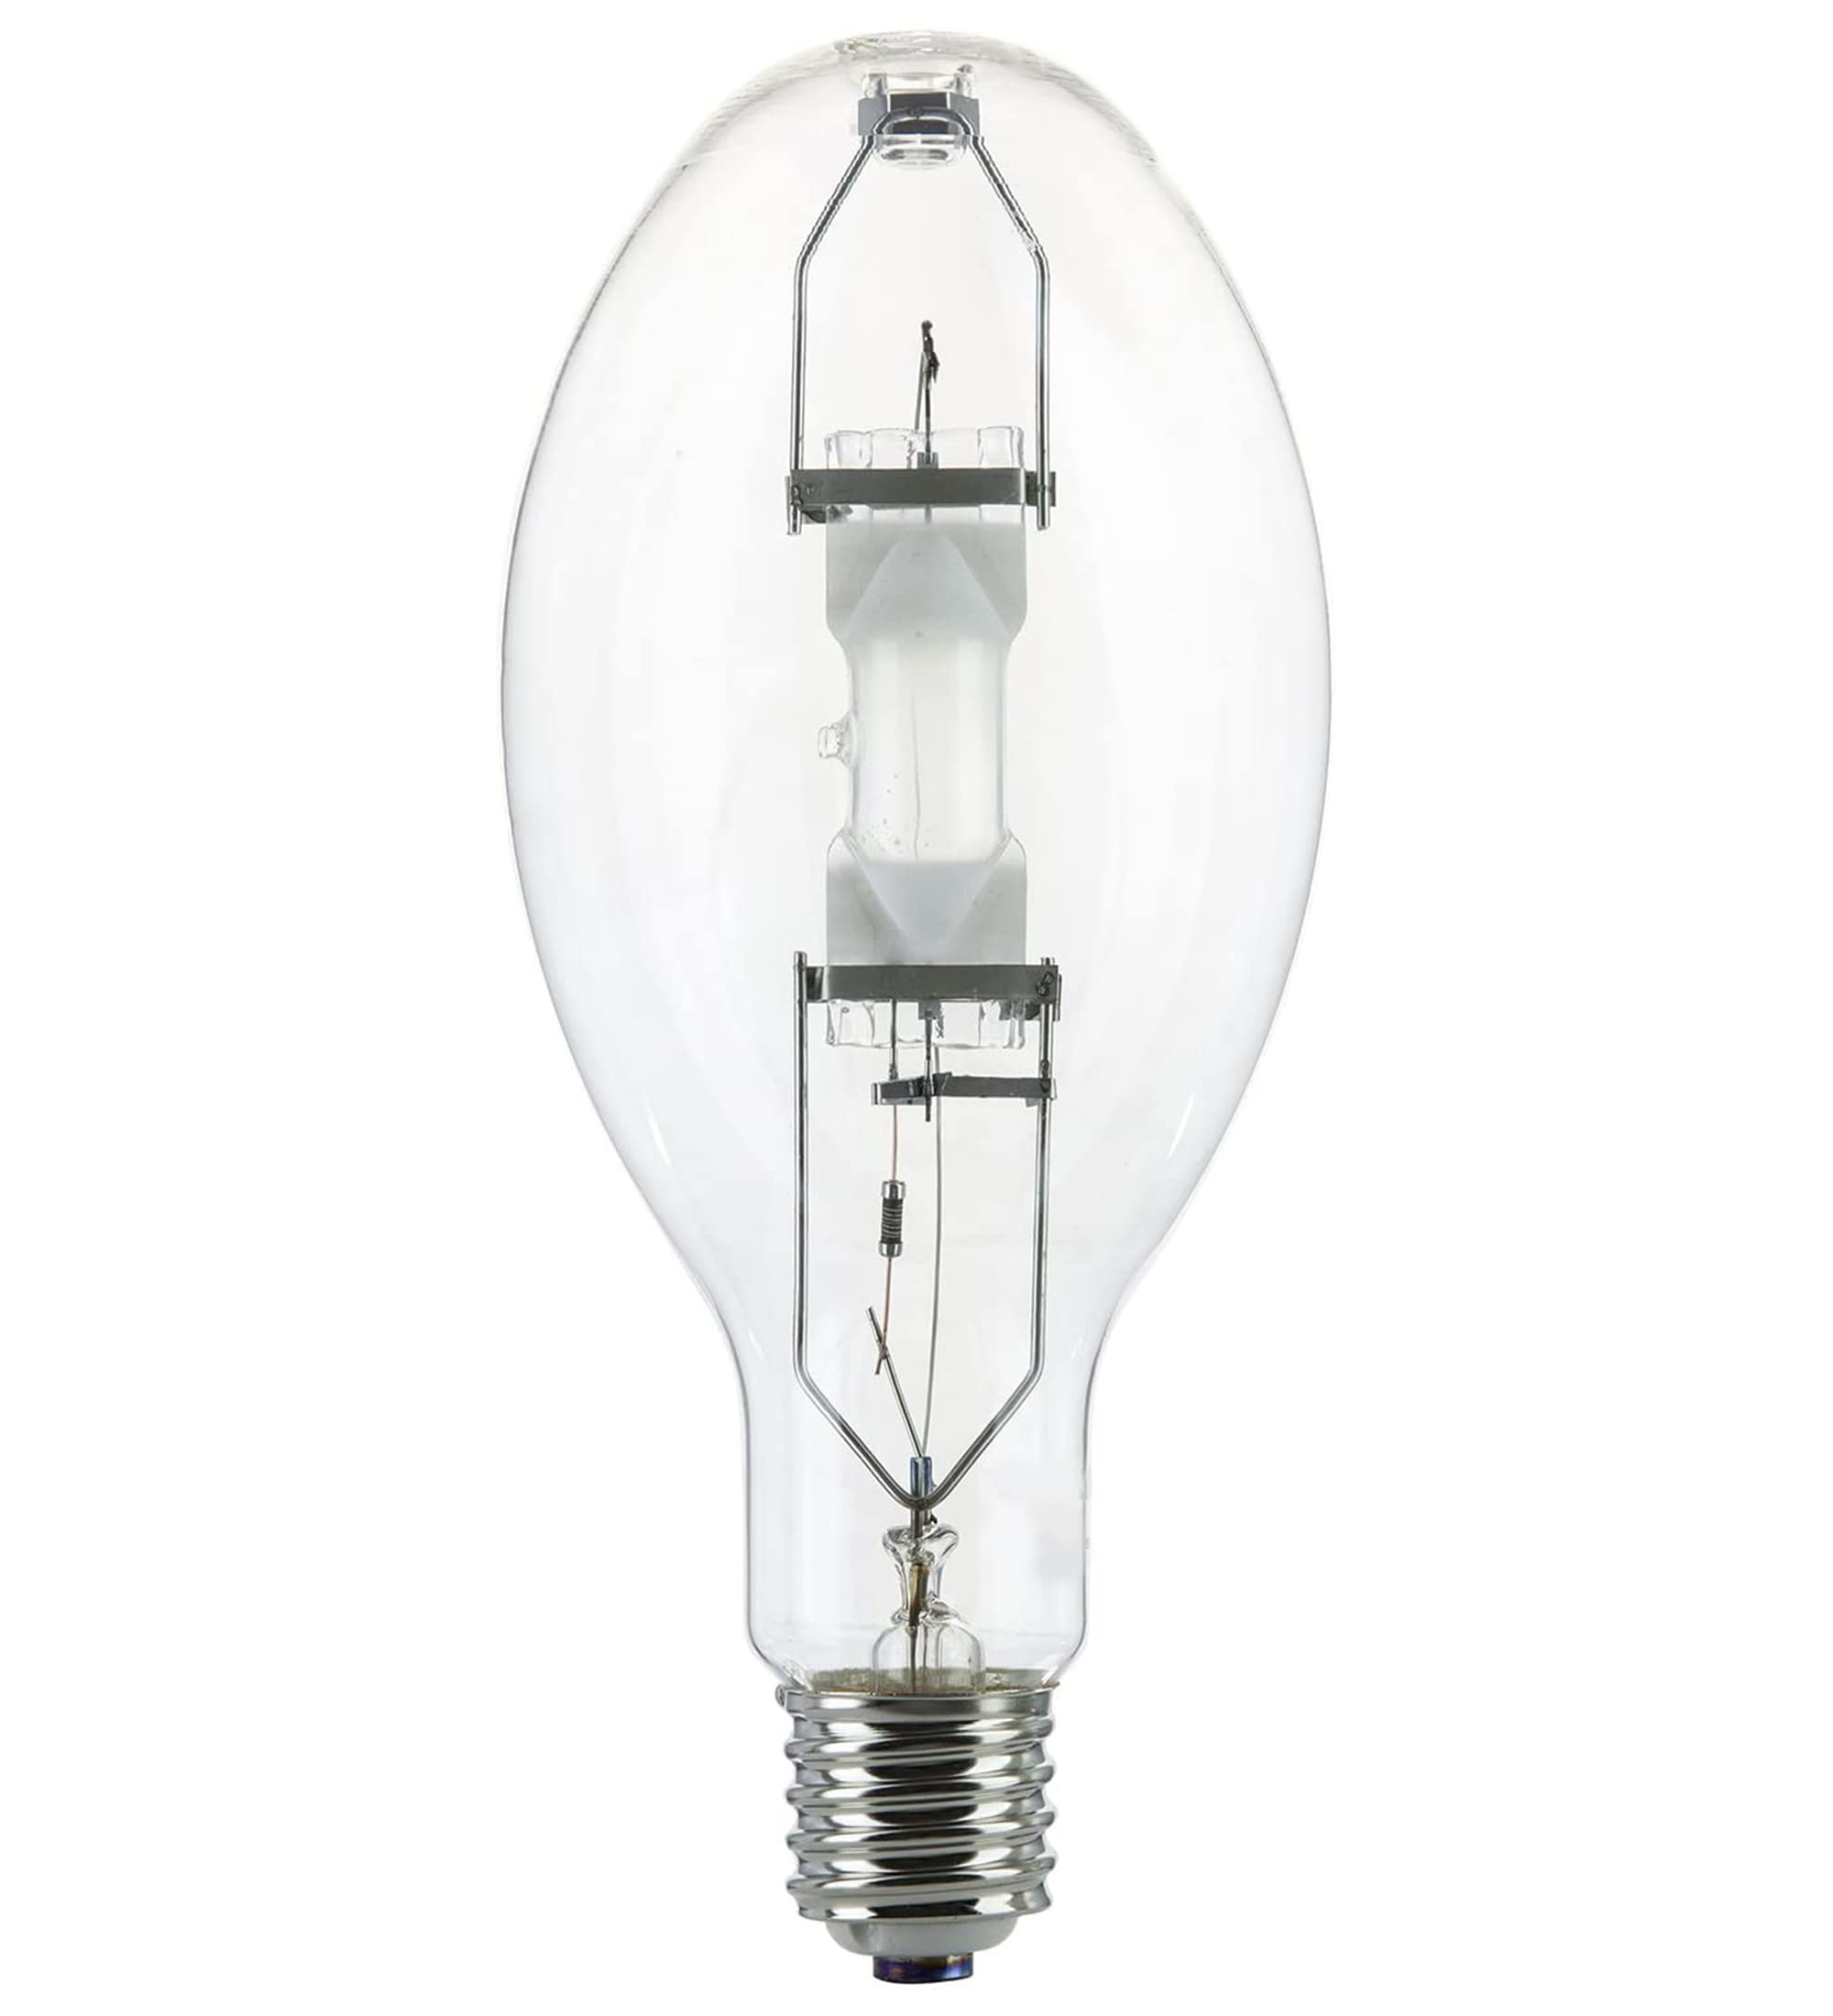 Ciata High-Intensity Discharge Lamps, 65 CRI, 4000K Cool White, E39 Mogul Base, 10000 Life Hours Metal Halide Lamps in Clear Finish for Commercial and Industrial Applications  - Like New